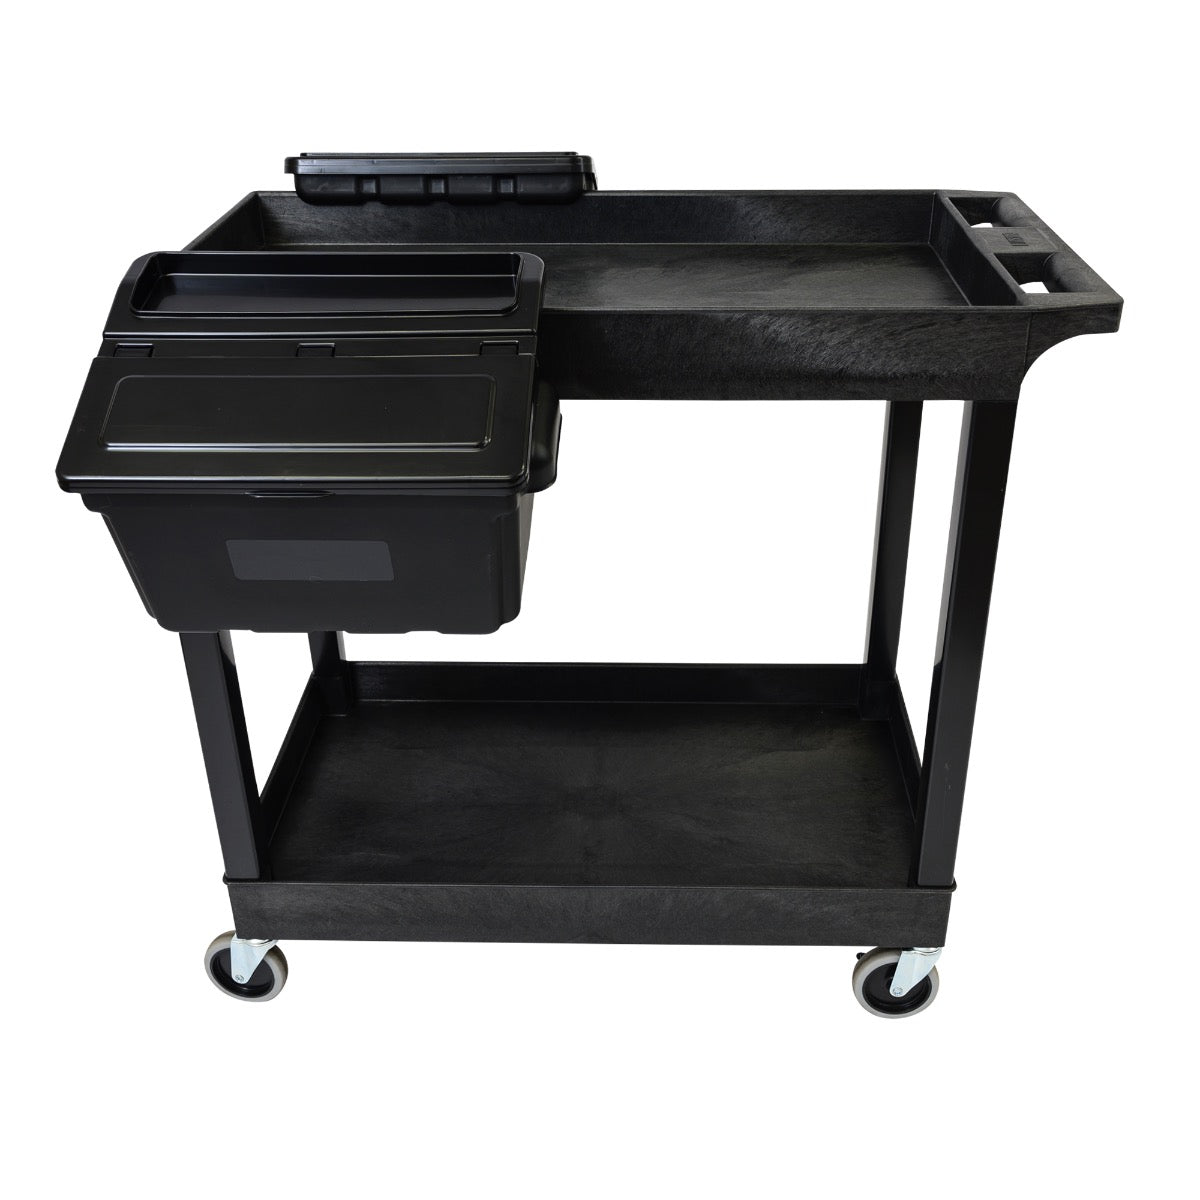 Luxor E Series EC11-B-OUTRIG - Tub Cart 2 Shelves with Outrigger Utility Cart Bins - 35.25" W x 34.25" H - SchoolOutlet